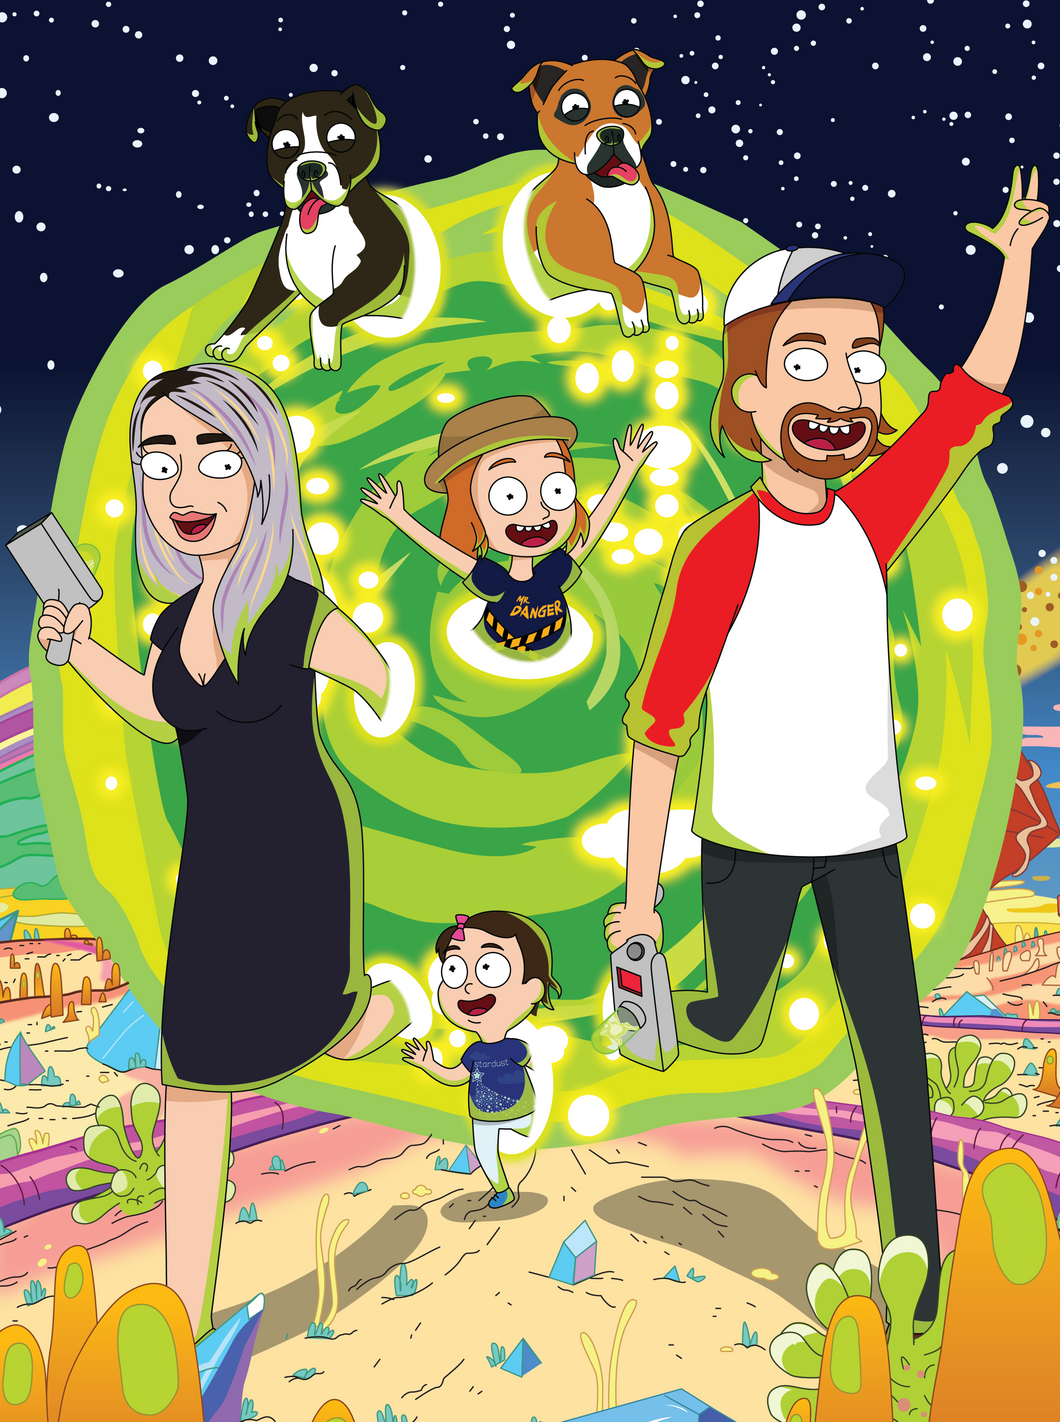 rick and morty family portrait with couple holding portal guns along with the kids and dogs, all coming out of the portal.